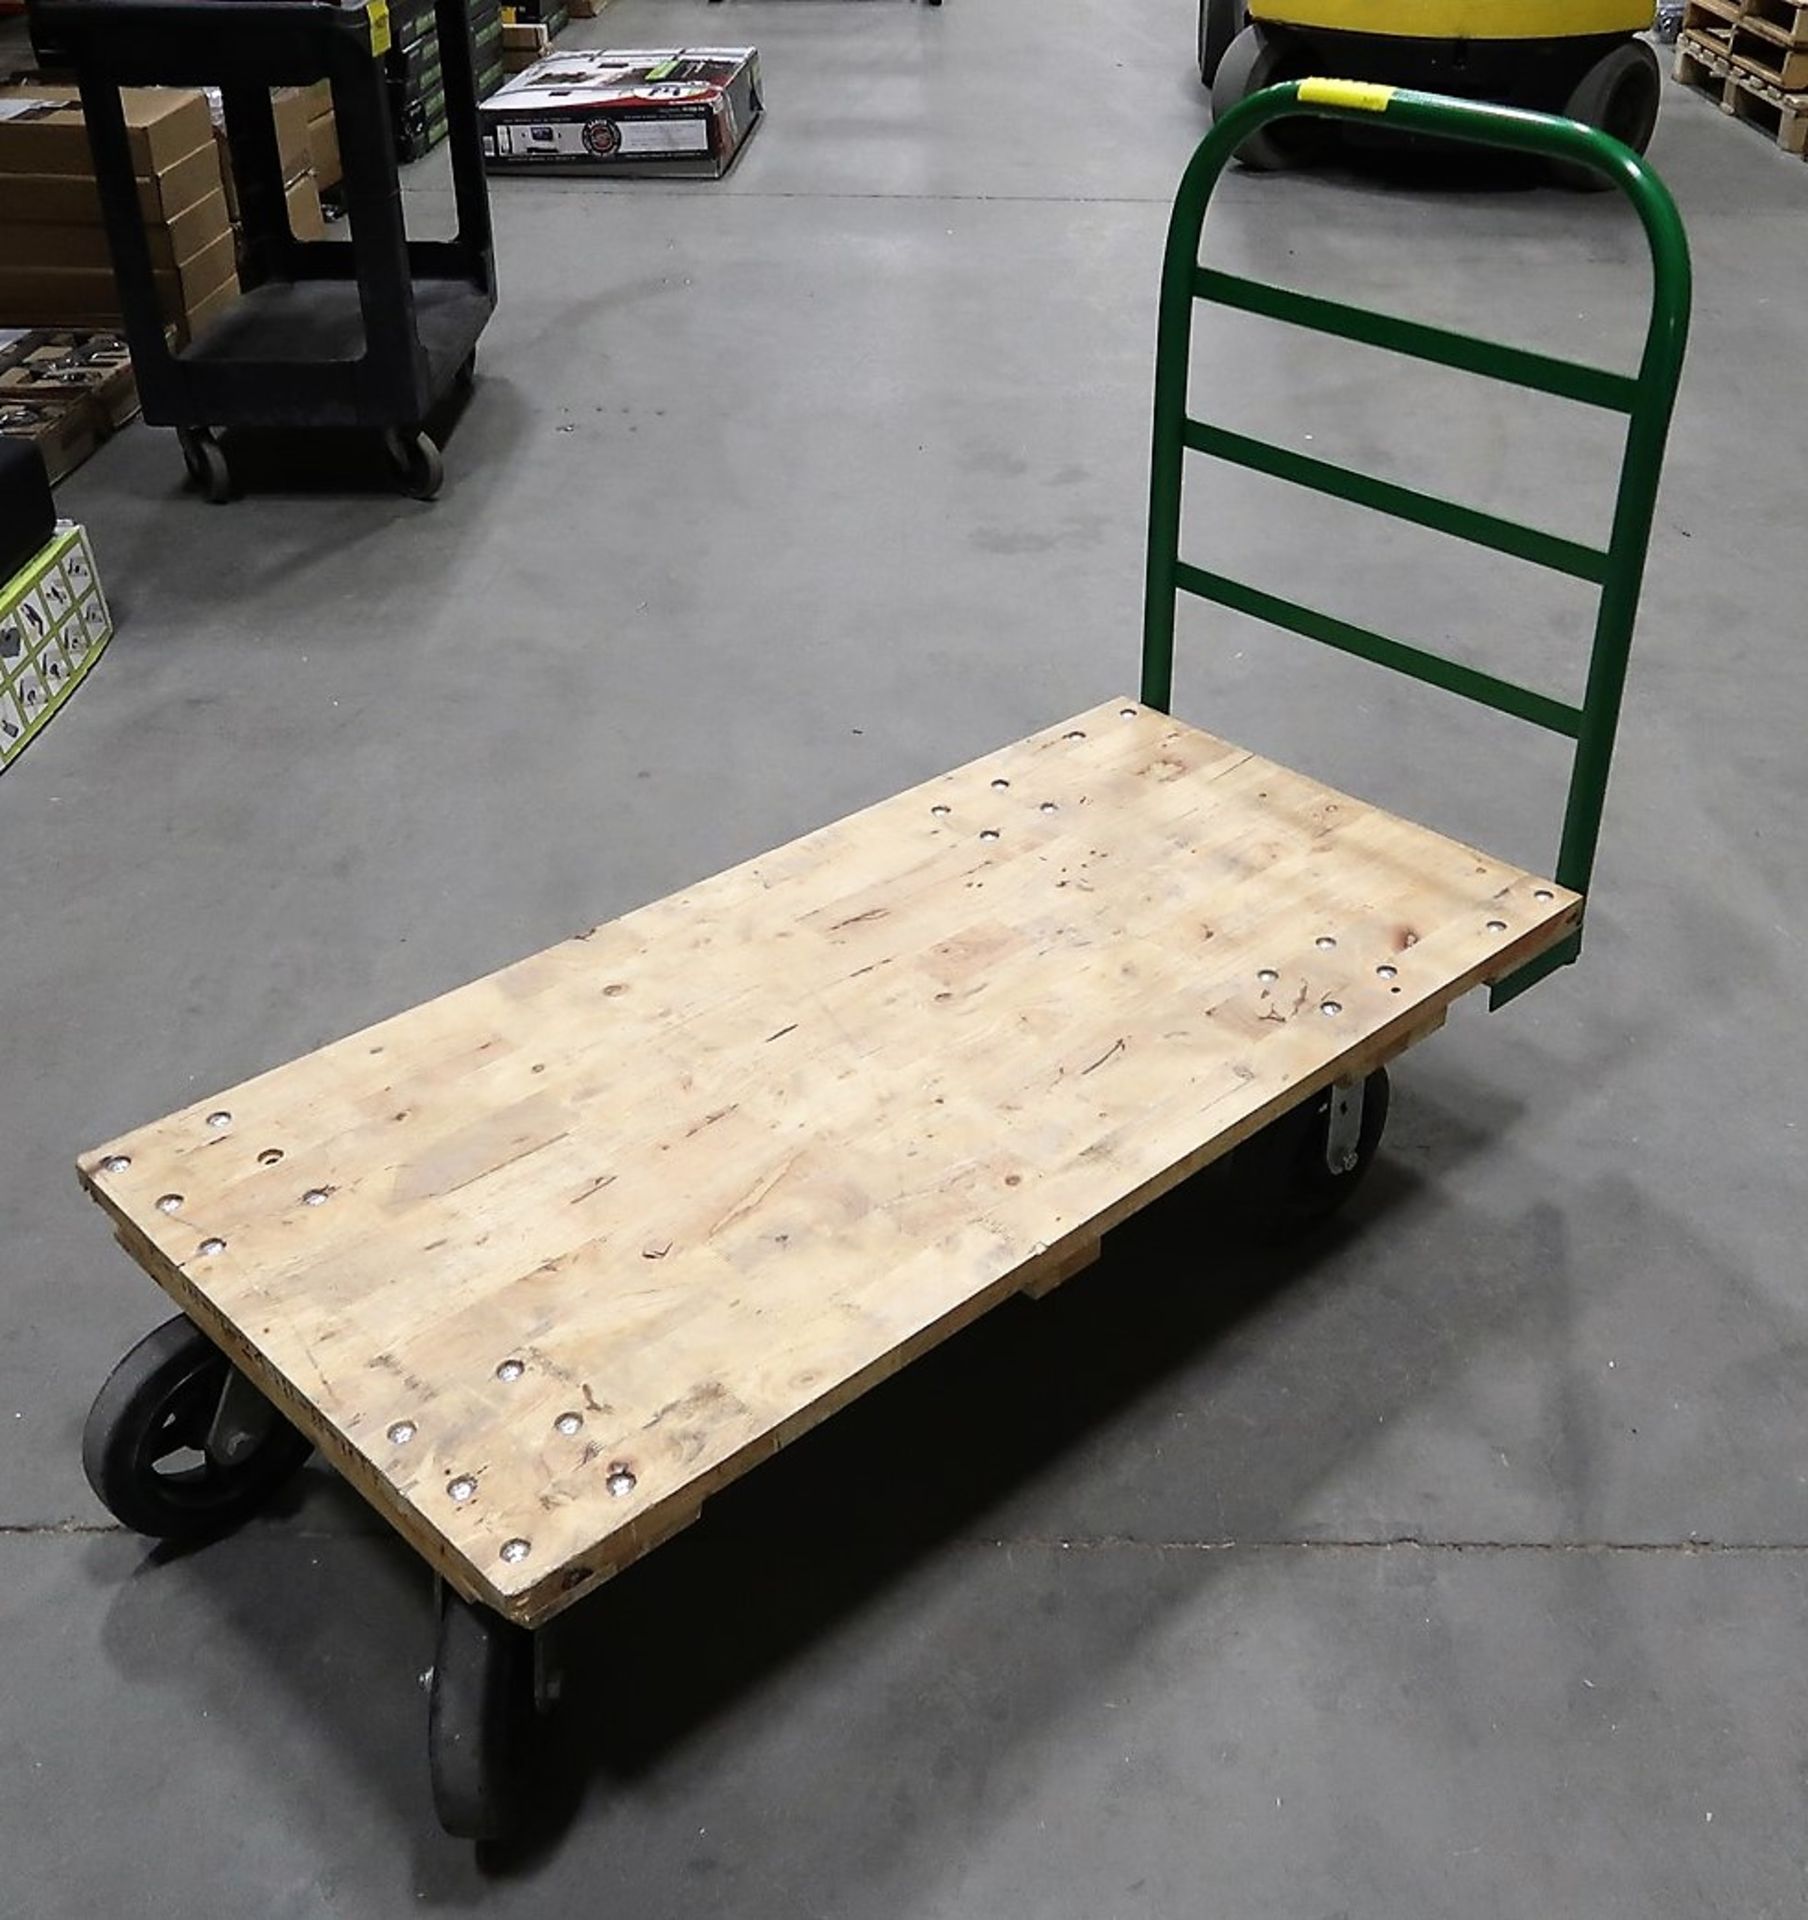 WOOD/METAL SHOP CART 4 FT. X 2 FT. (SUBJECT TO LATE REMOVAL, PICKUP ON JULY 7TH) - Image 2 of 2